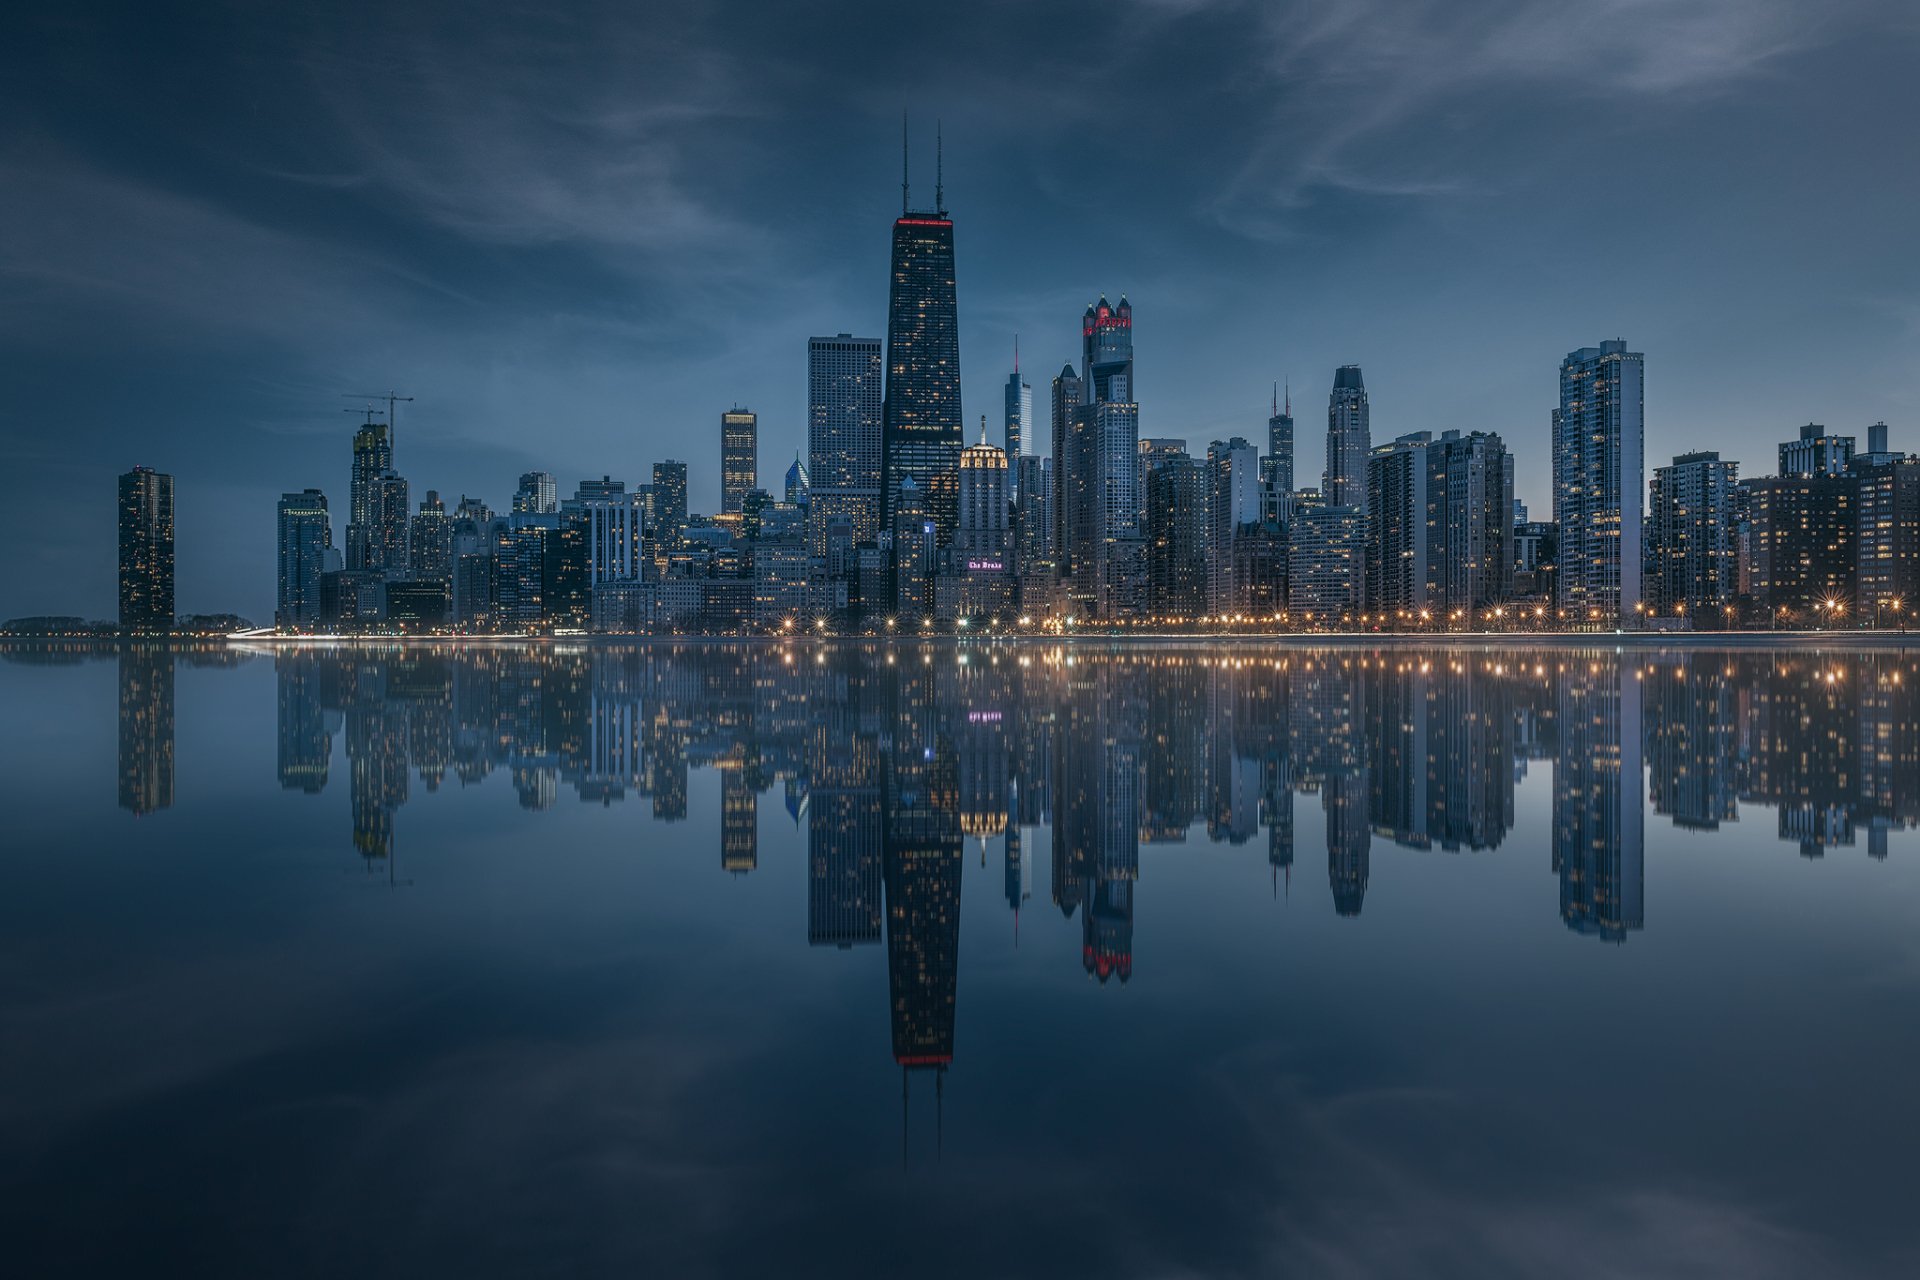 Chicago Night Pictures  Download Free Images on Unsplash